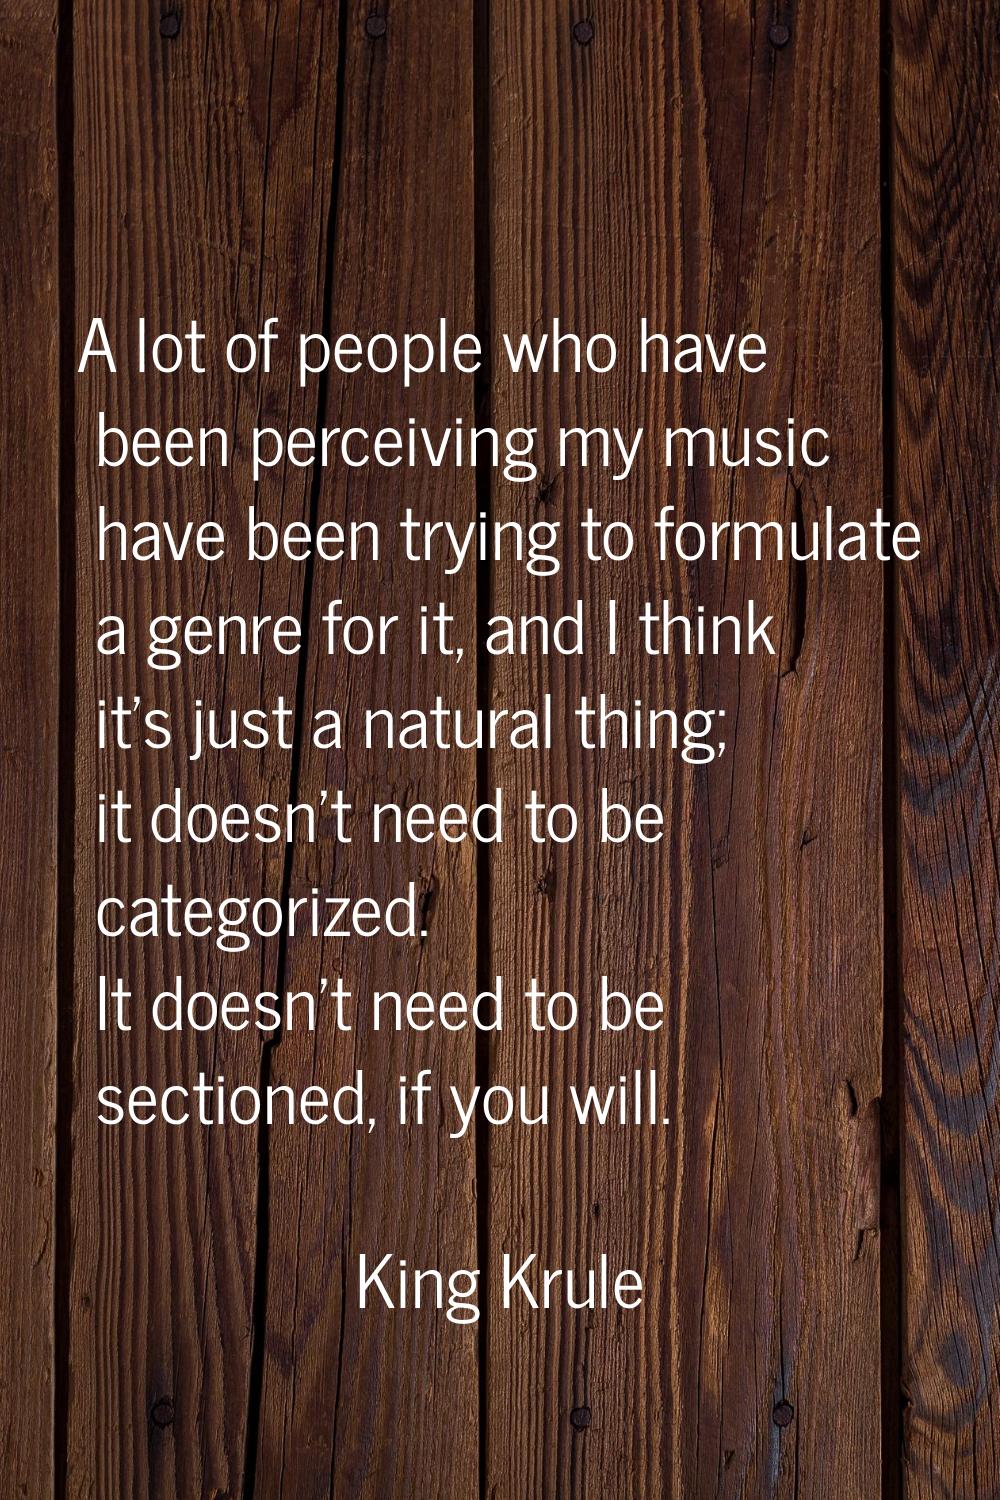 A lot of people who have been perceiving my music have been trying to formulate a genre for it, and